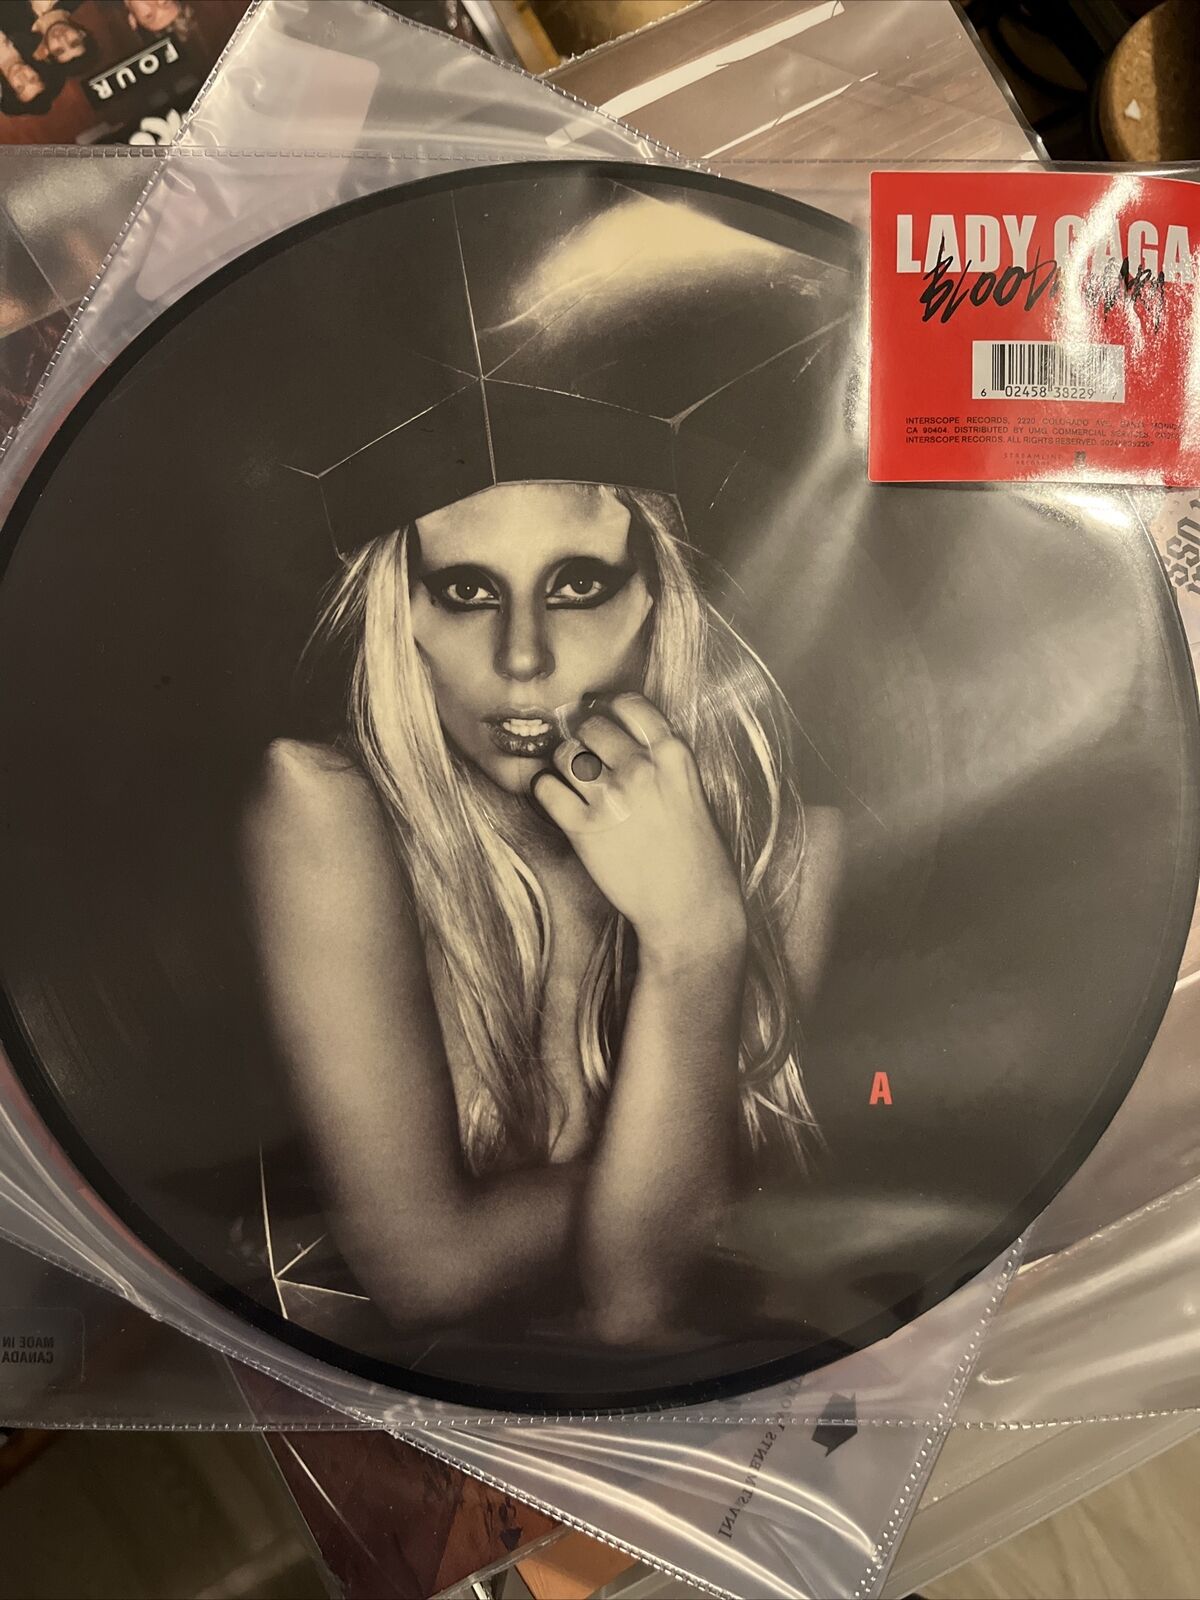 Lady Gaga – Bloody Mary - Picture Disc 12" Vinyl Record Single - NEW